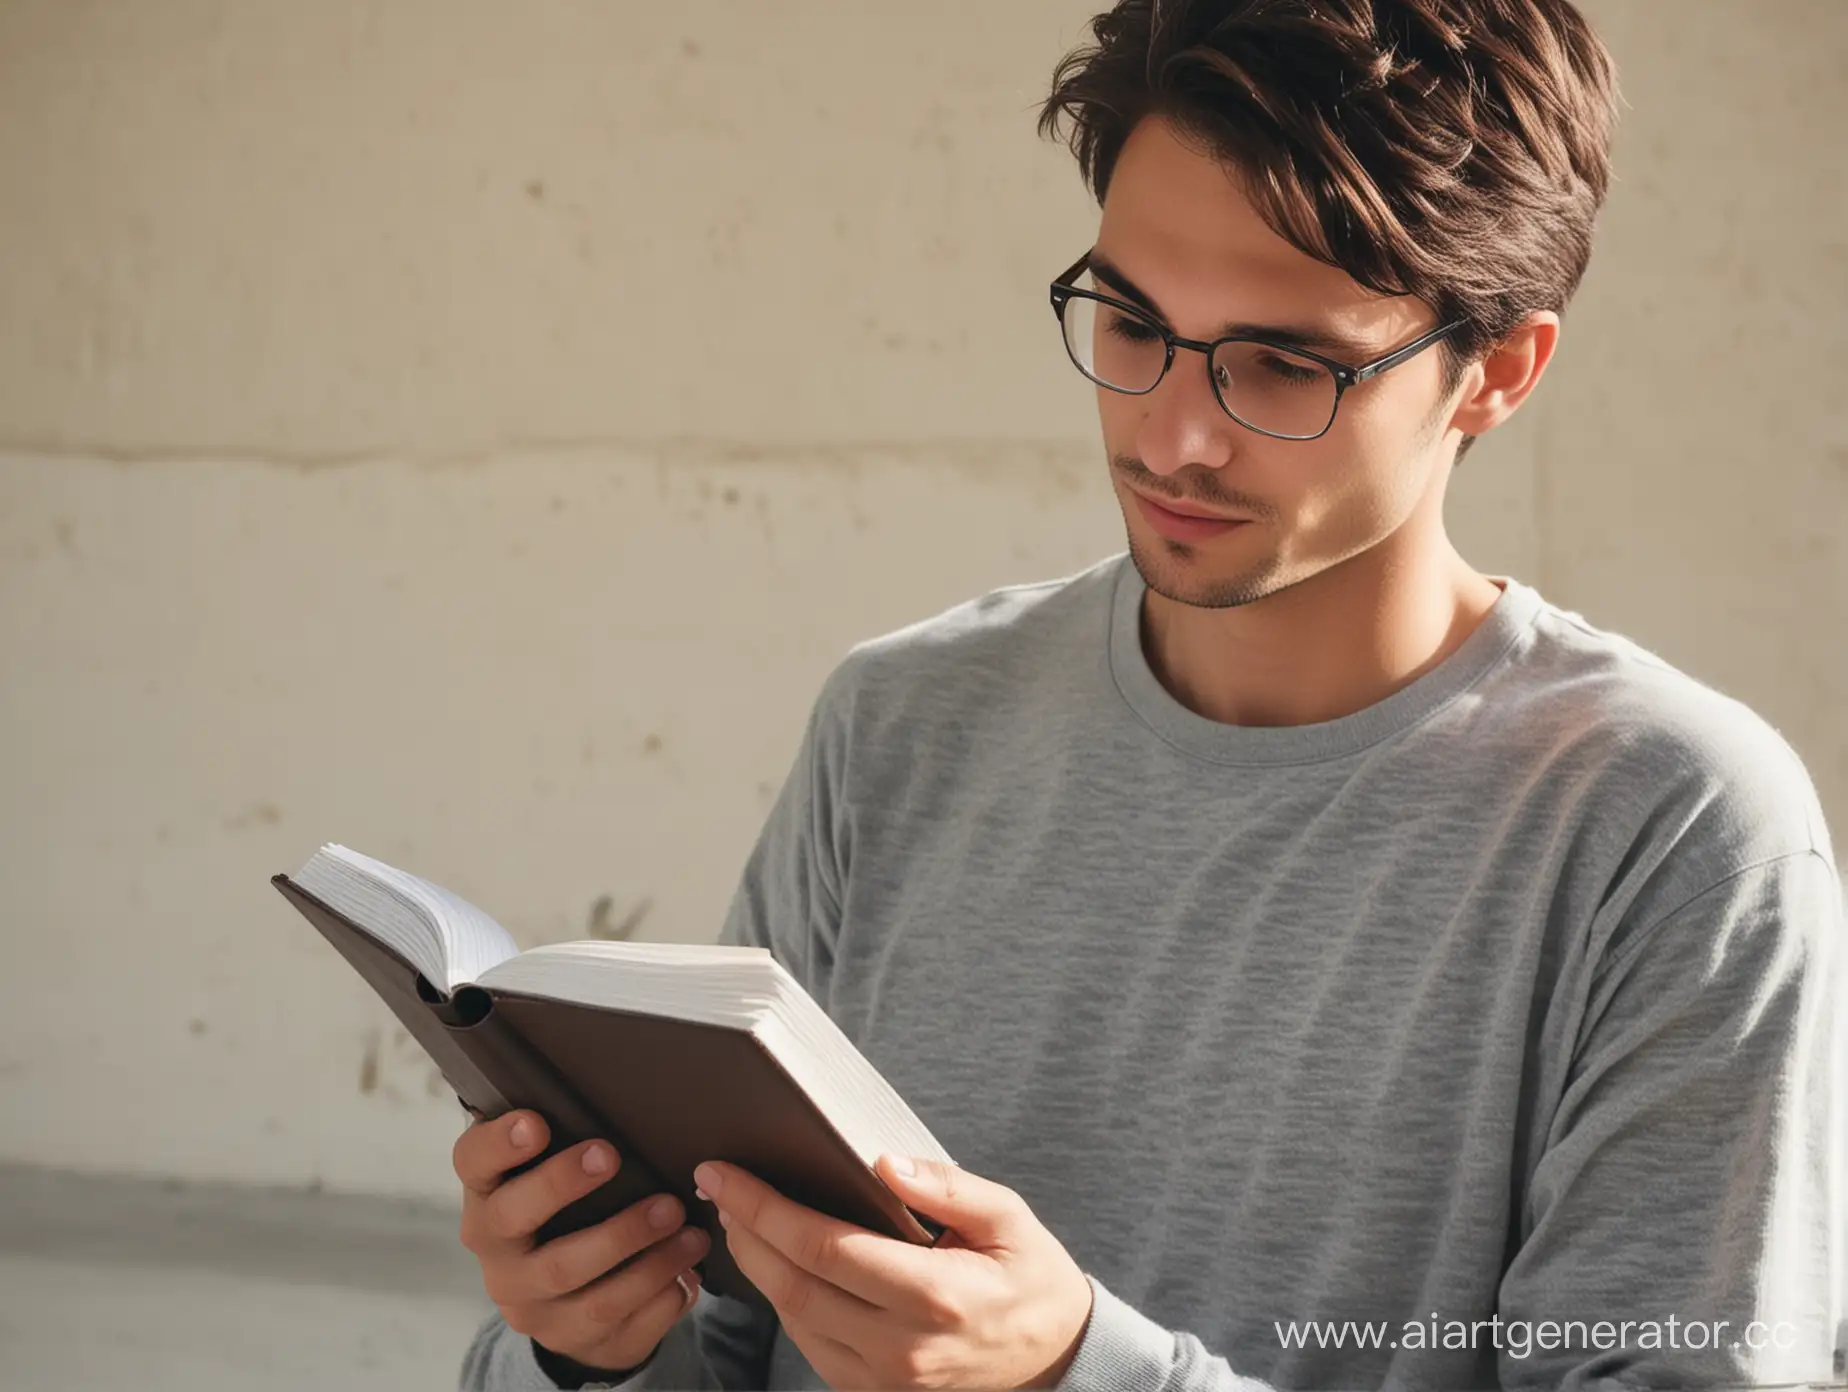 Young-Man-Reflecting-While-Holding-a-Journal